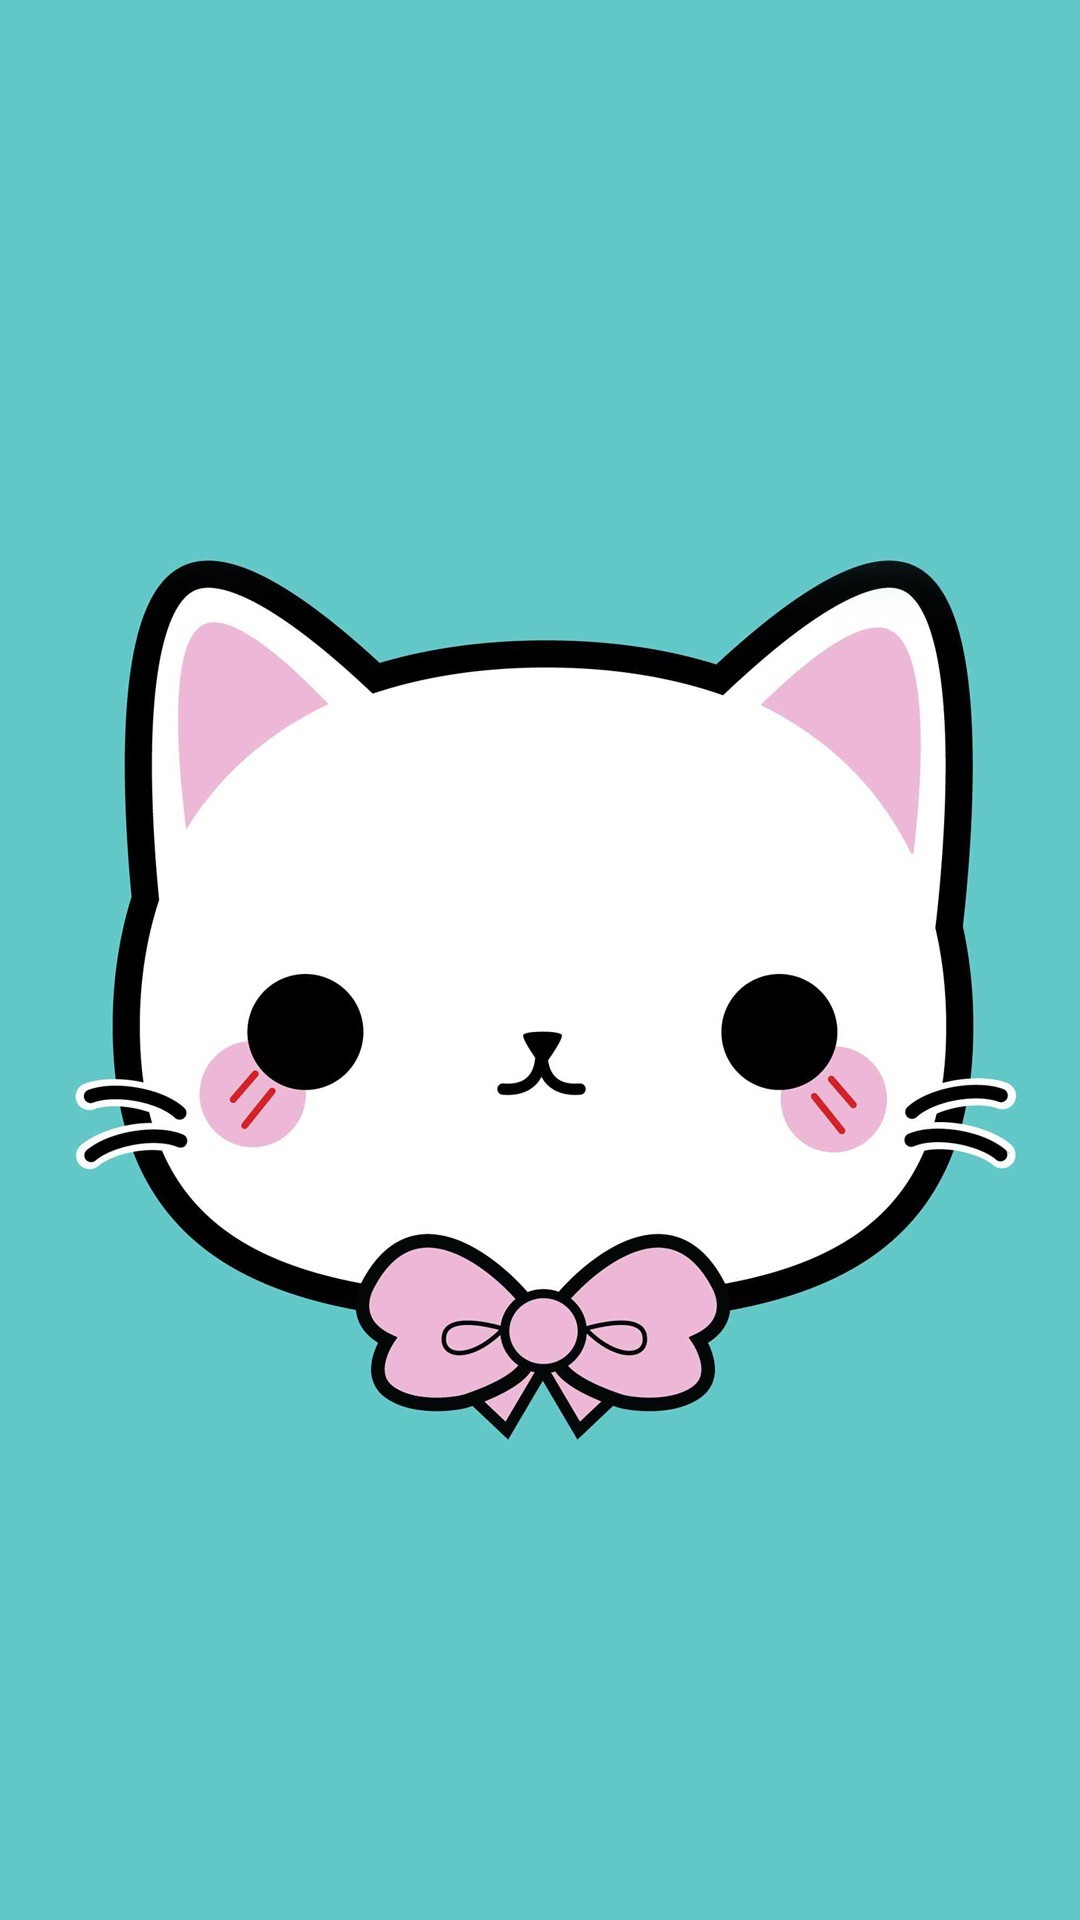 Bow Kitty And Like Omg Get Some Yourself Some Pawtastic Kawaii Cat Faces